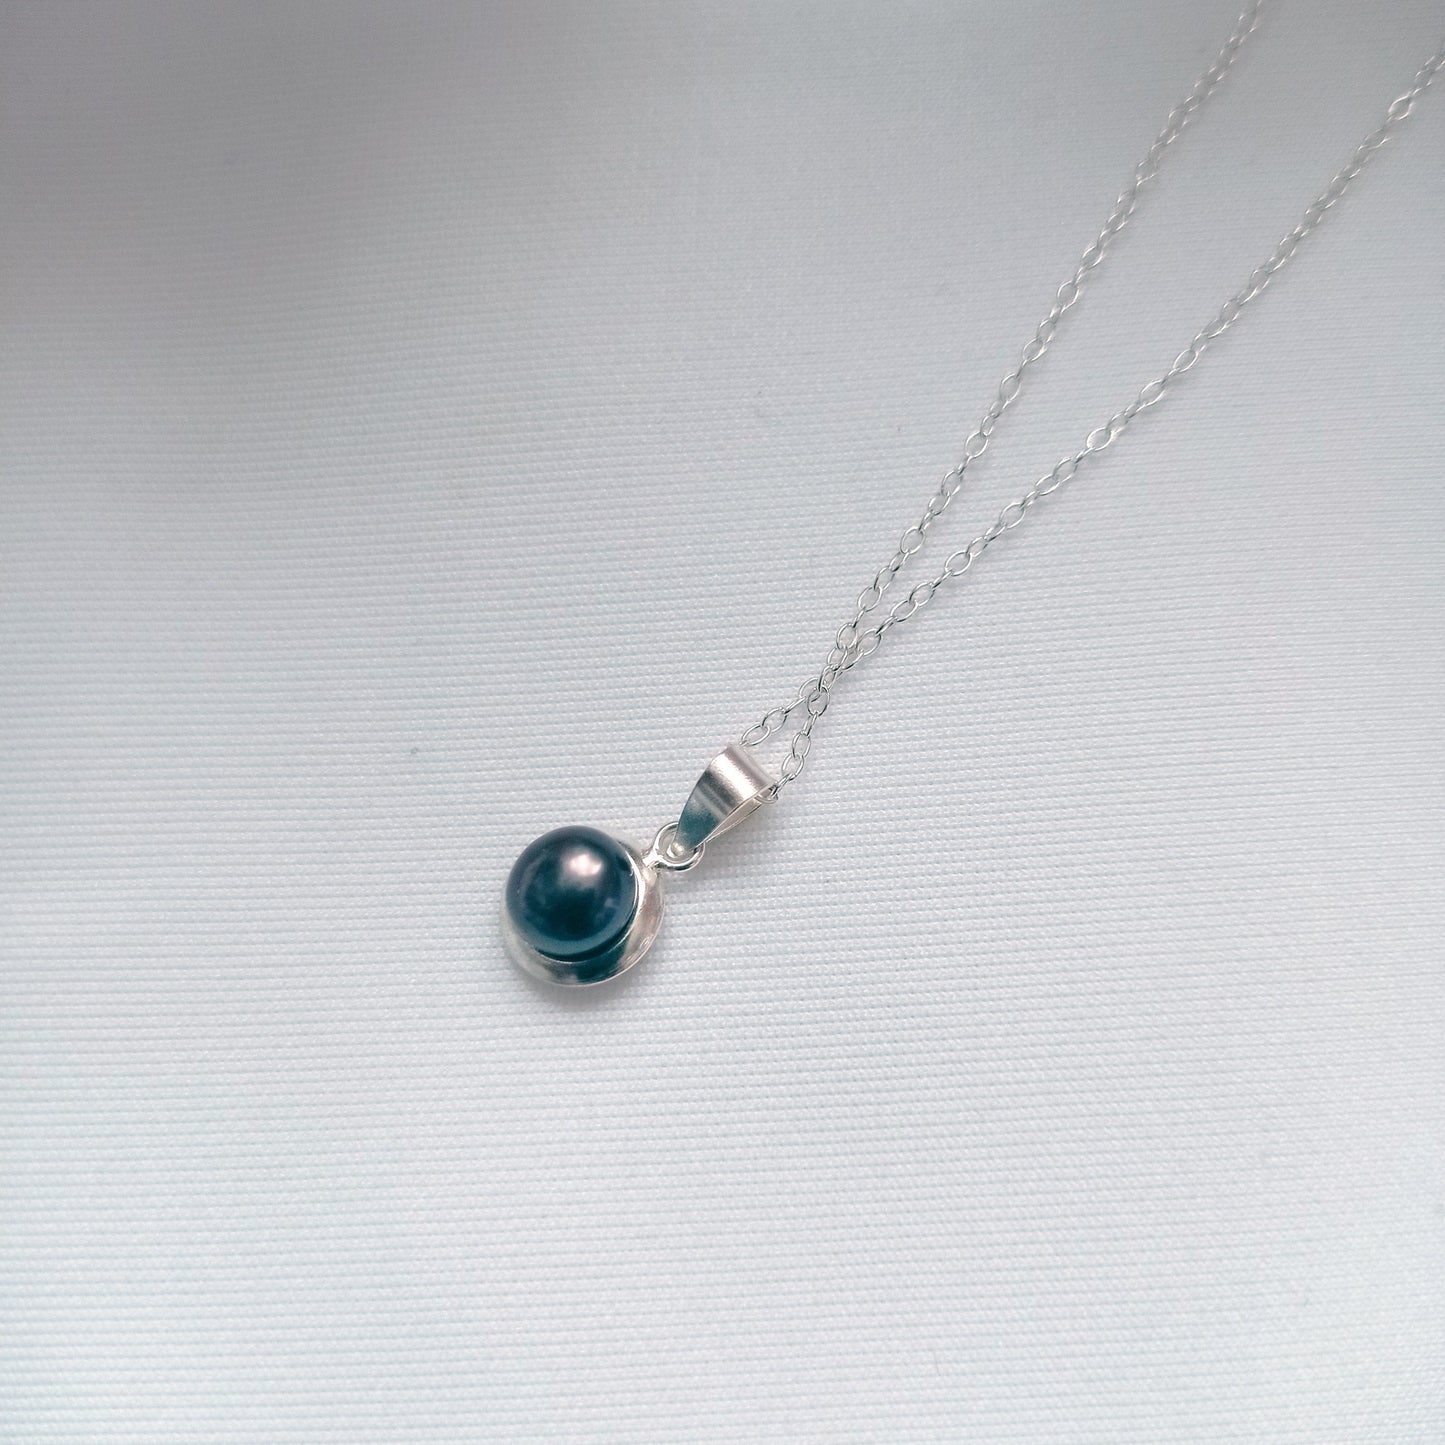 Black Freshwater Pearl Encased In Sterling Silver, .925 Sterling Silver Necklace, Bloom Collection | by nlanlaVictory-1